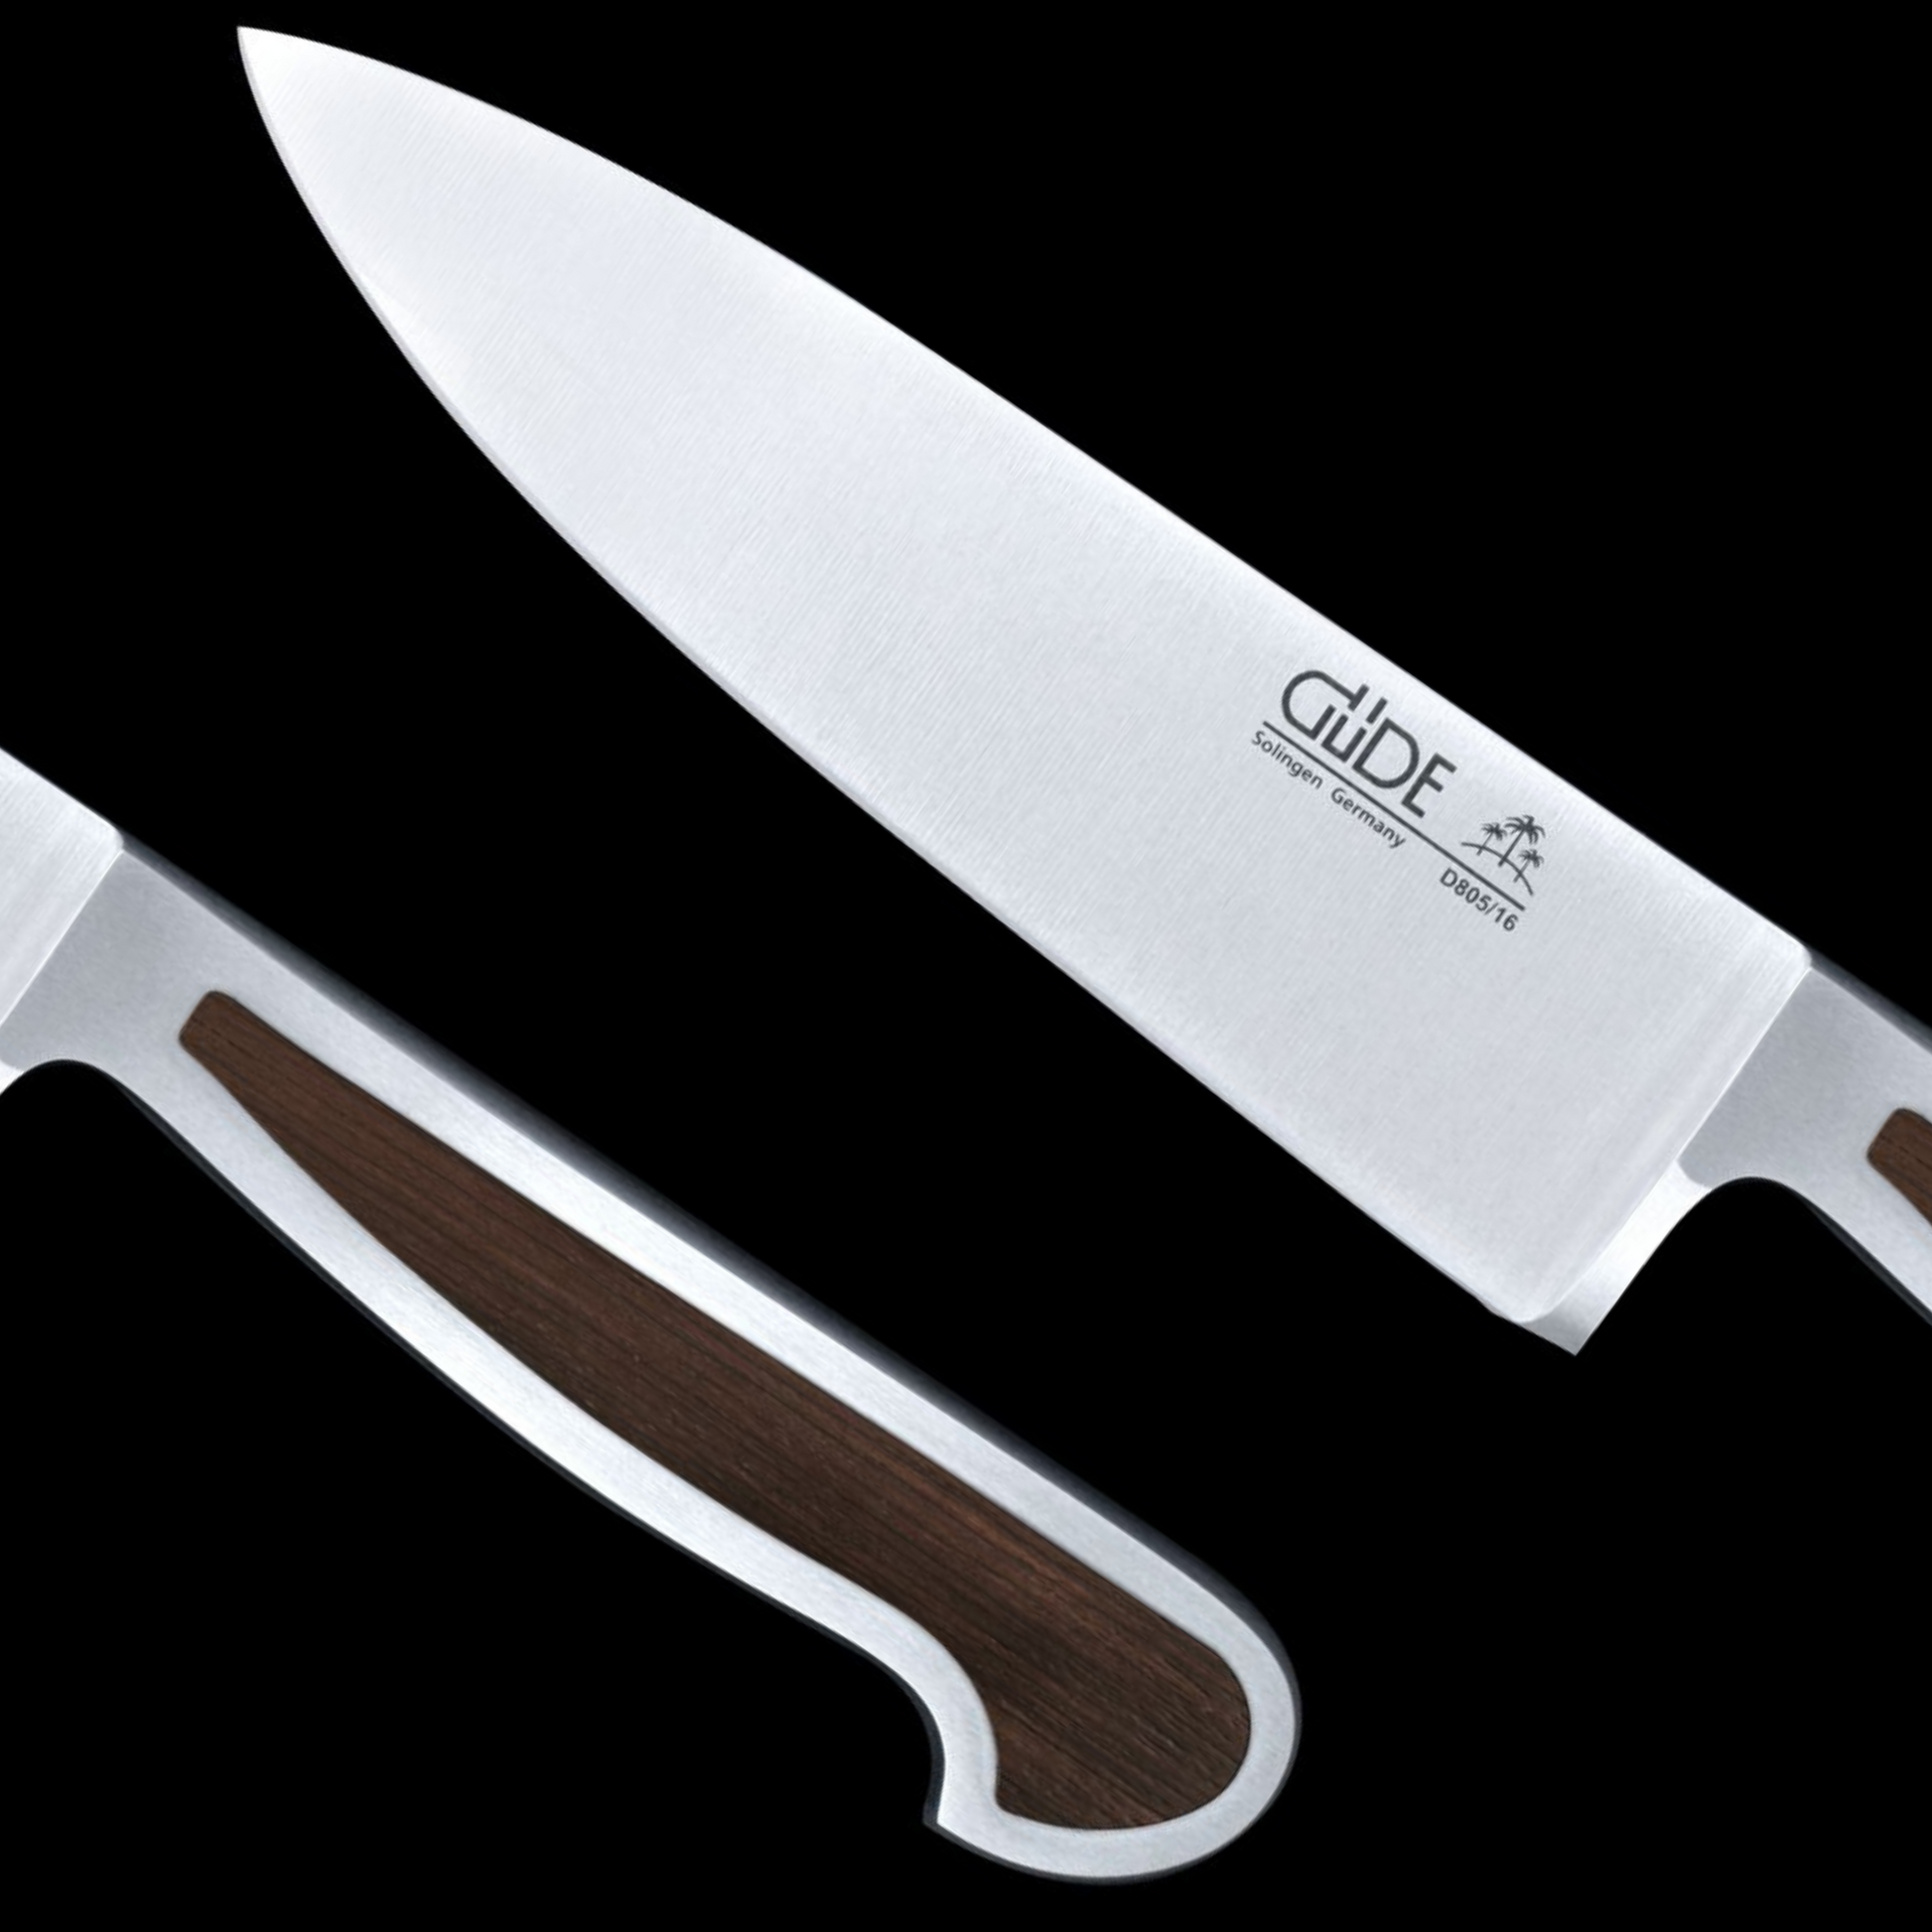 Gude Delta Series Forged Double Bolster Chef's Knife 6", African Black Wood Handle - GuedeUSA